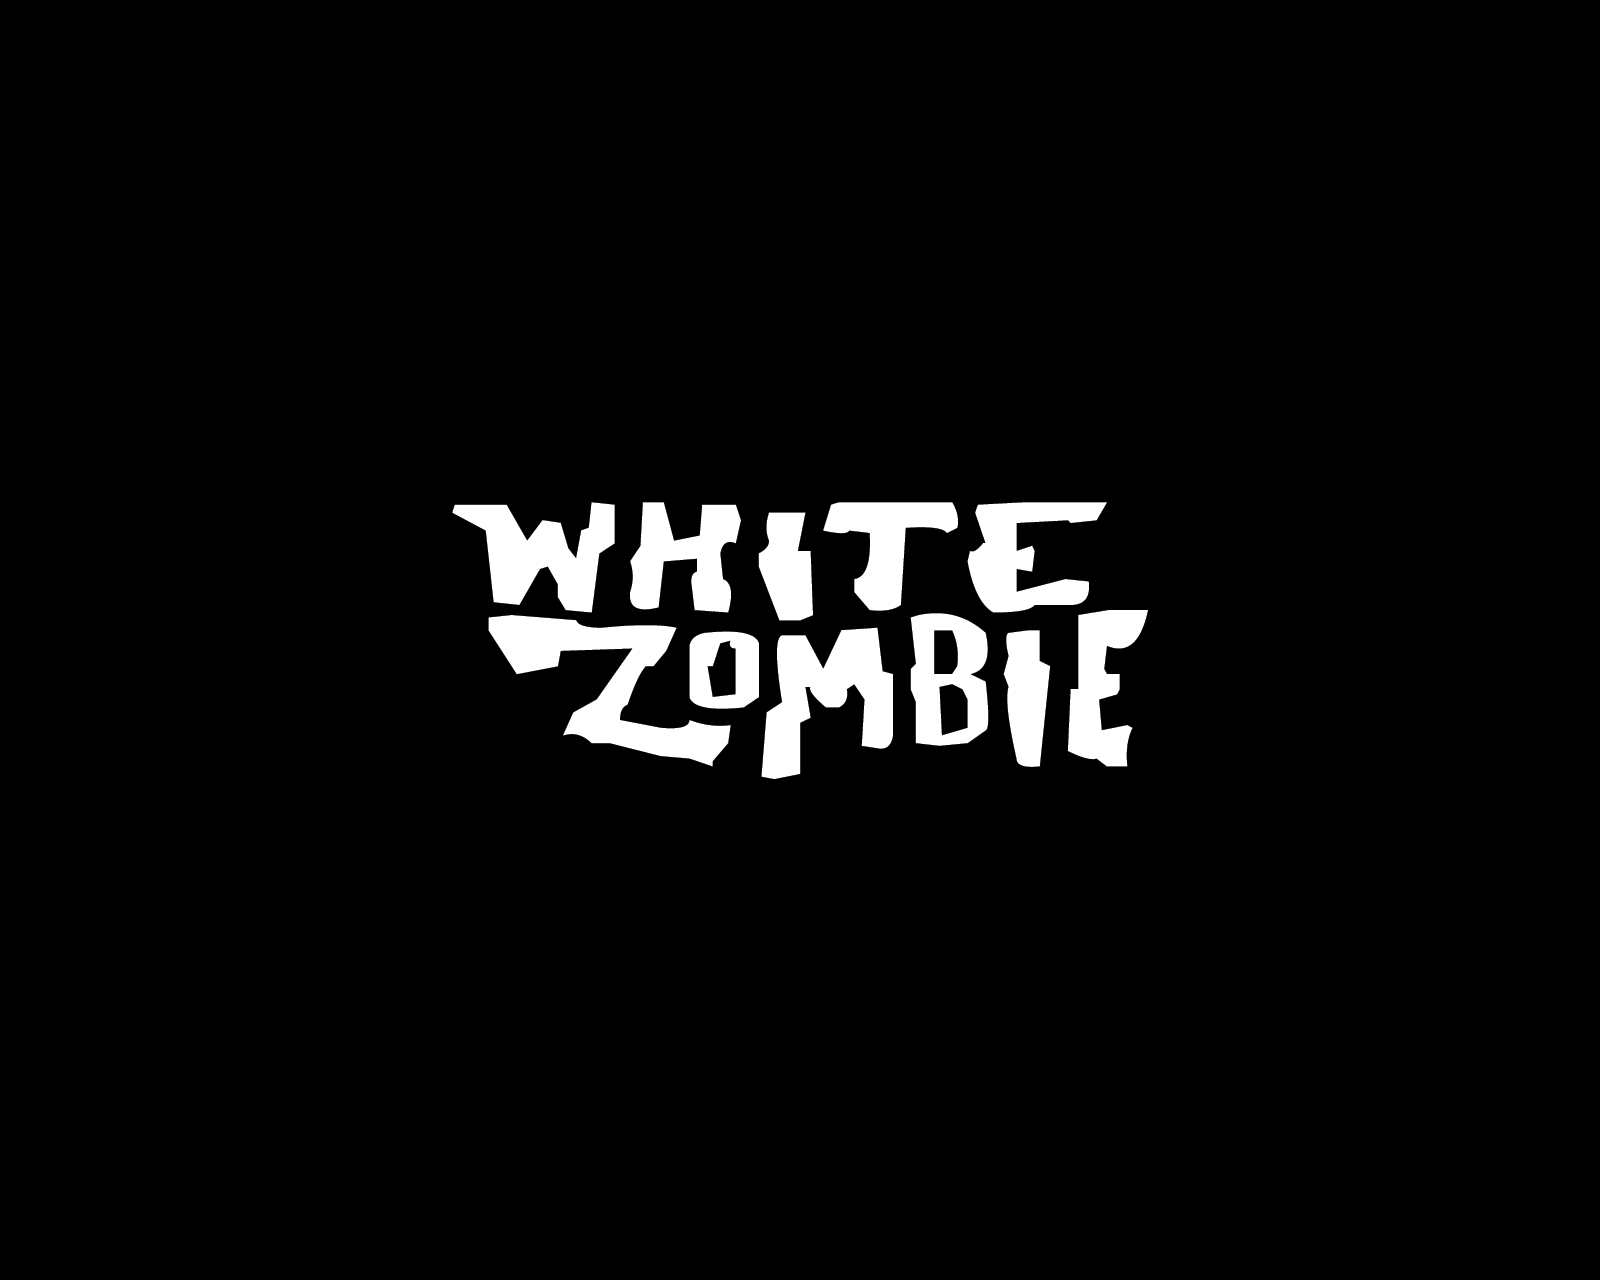 Music White Zombie HD Wallpaper | Background Image